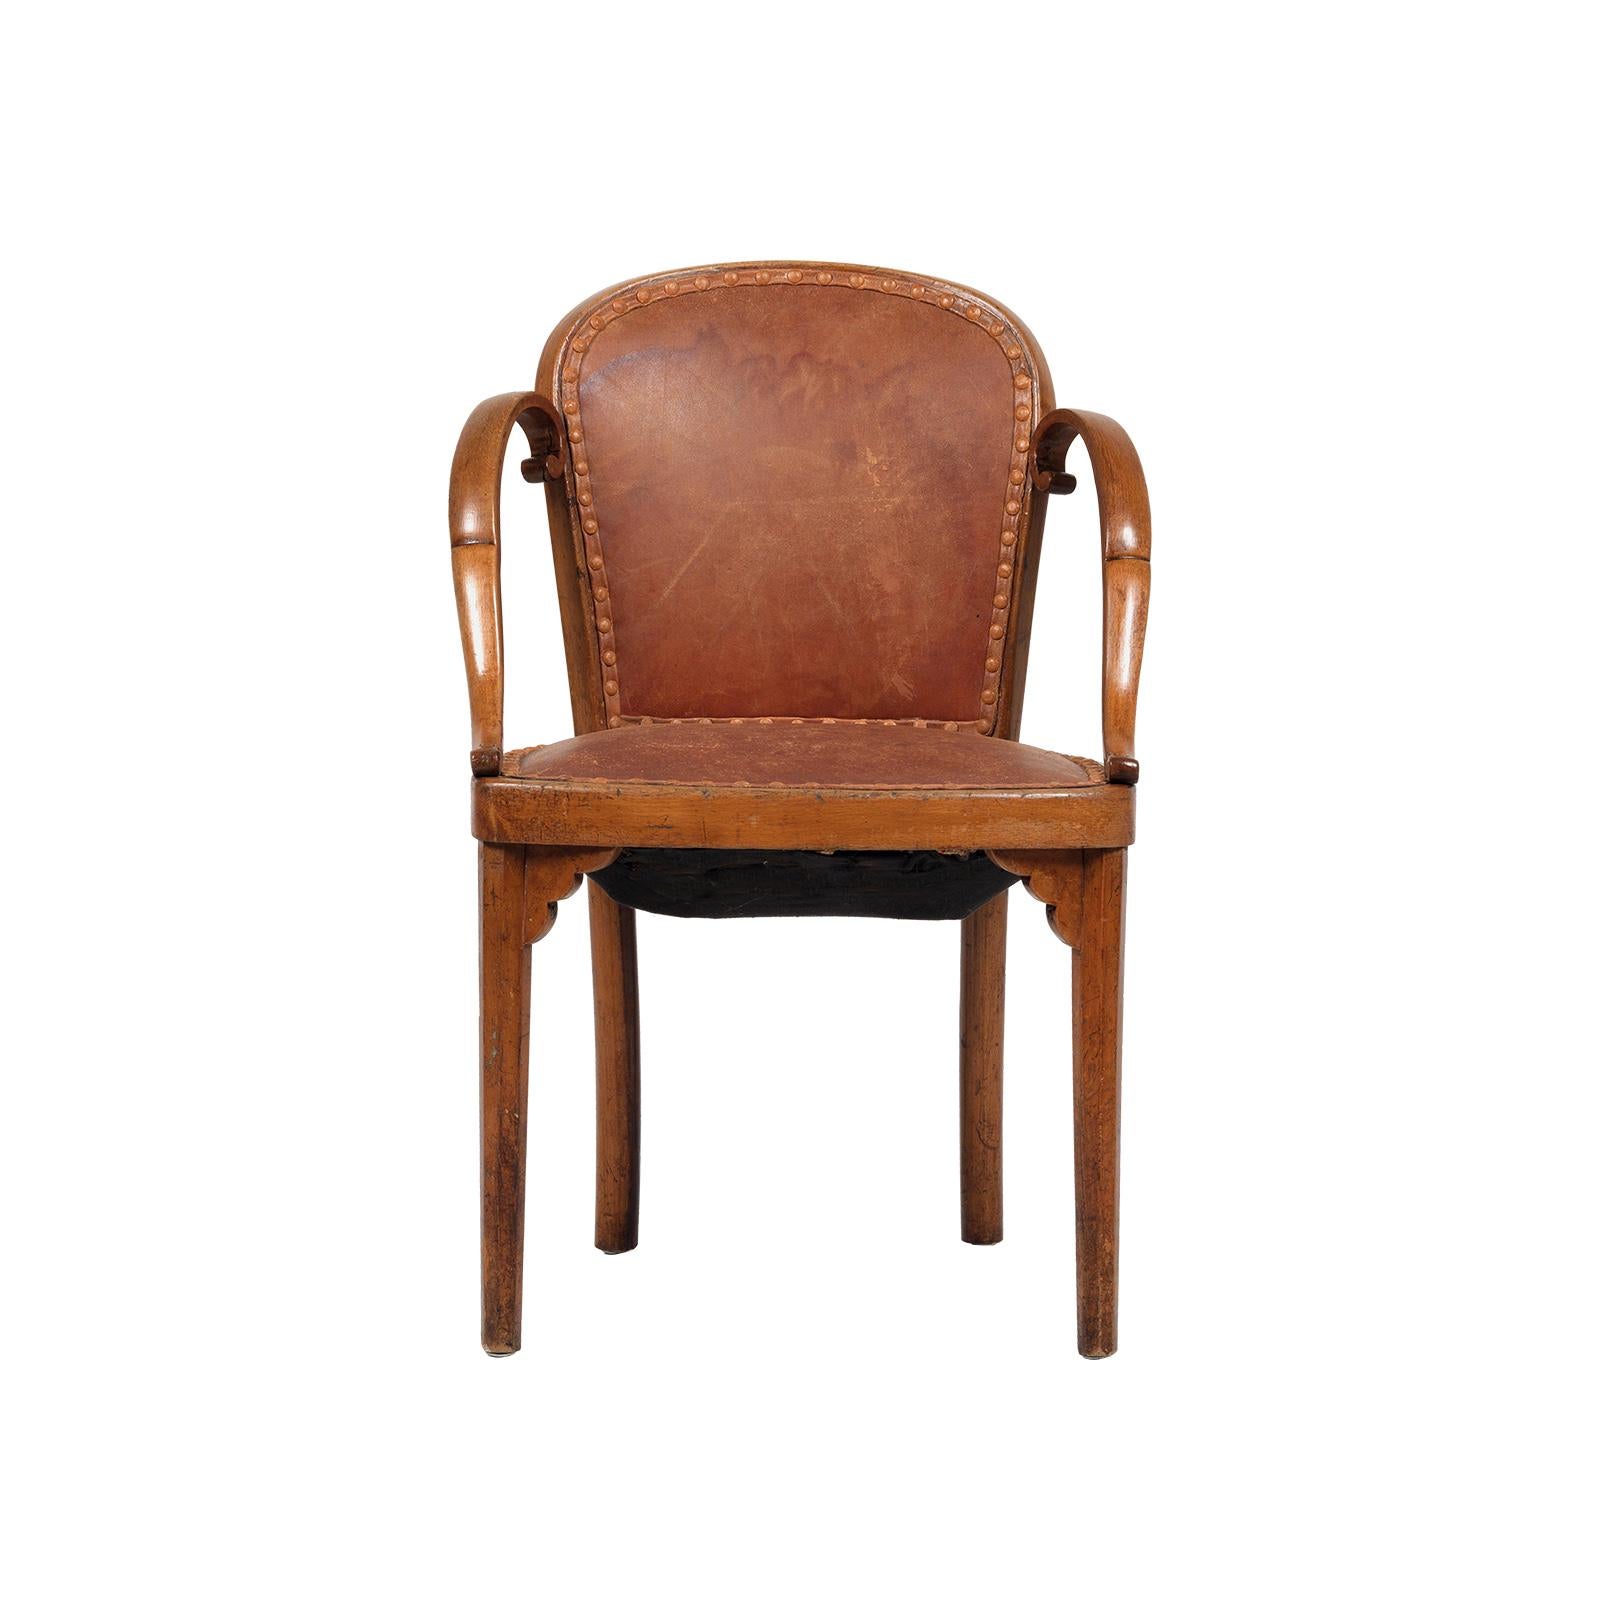 A very rare and so far undocumented armchair by Josef Hoffmann, original leather upholstery, branding iron J&J Kohn. An identical chair with a different upholstery is available as well.

